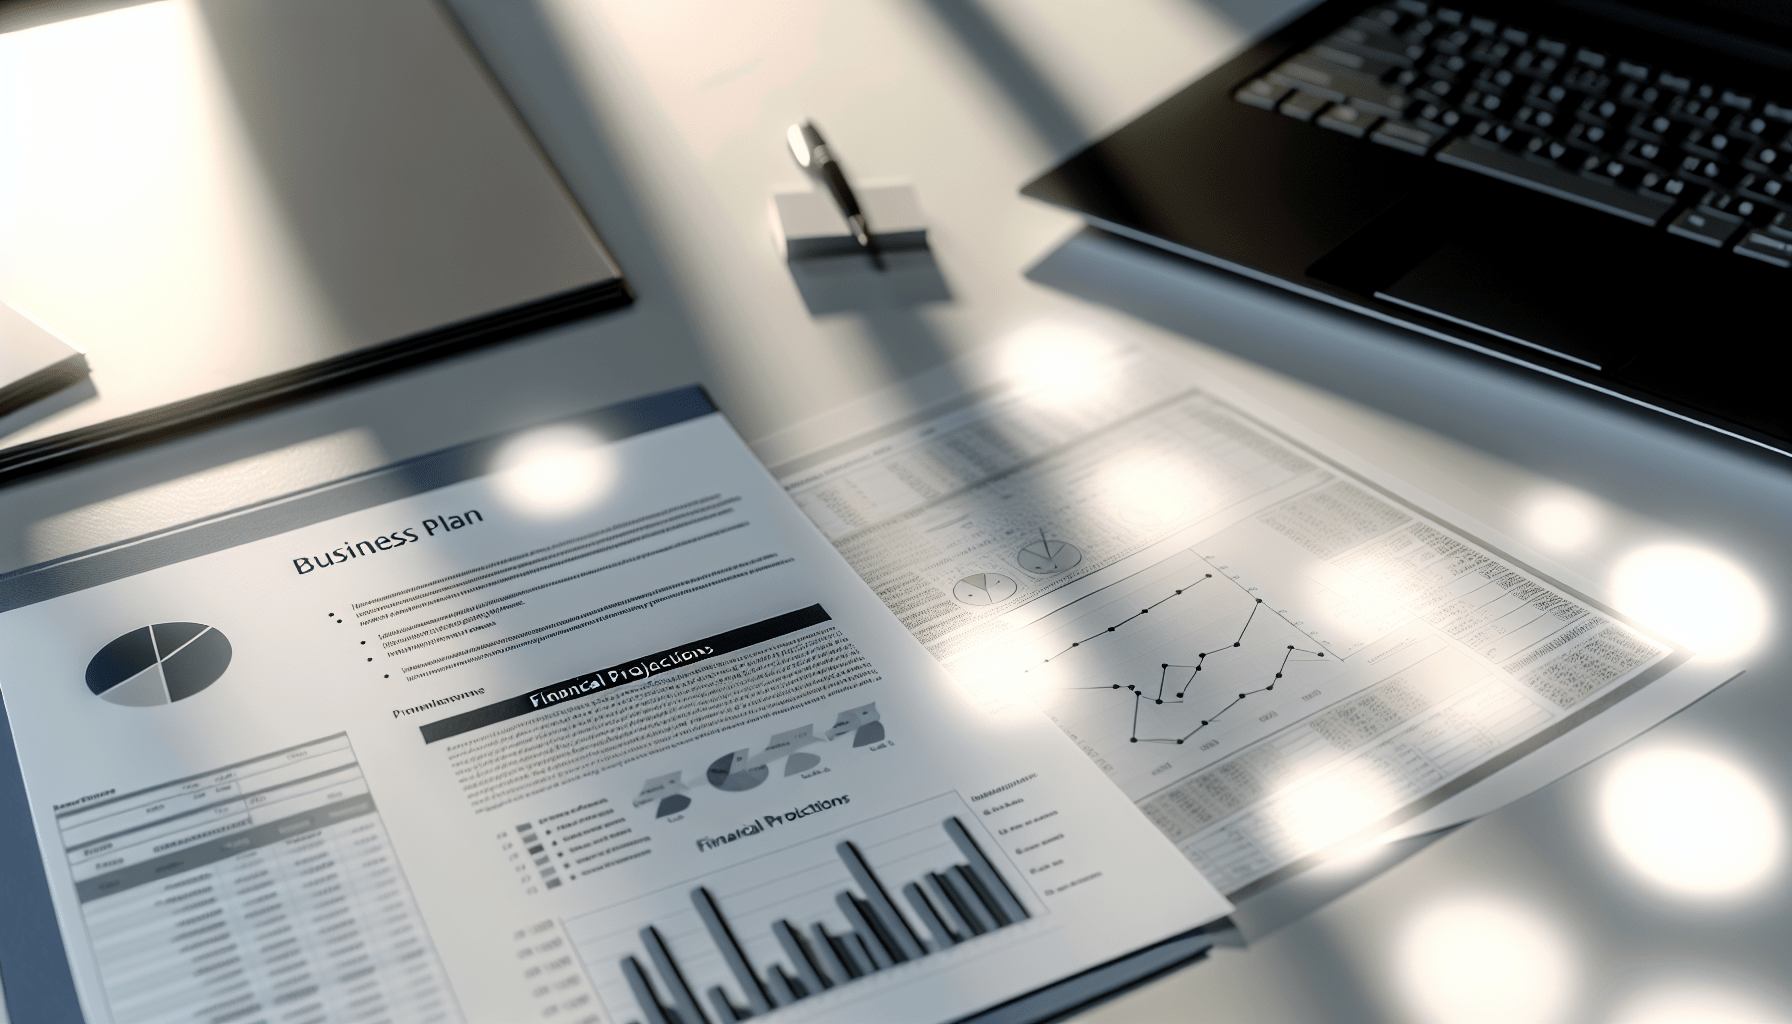 Financial projections and business plan document on a desk